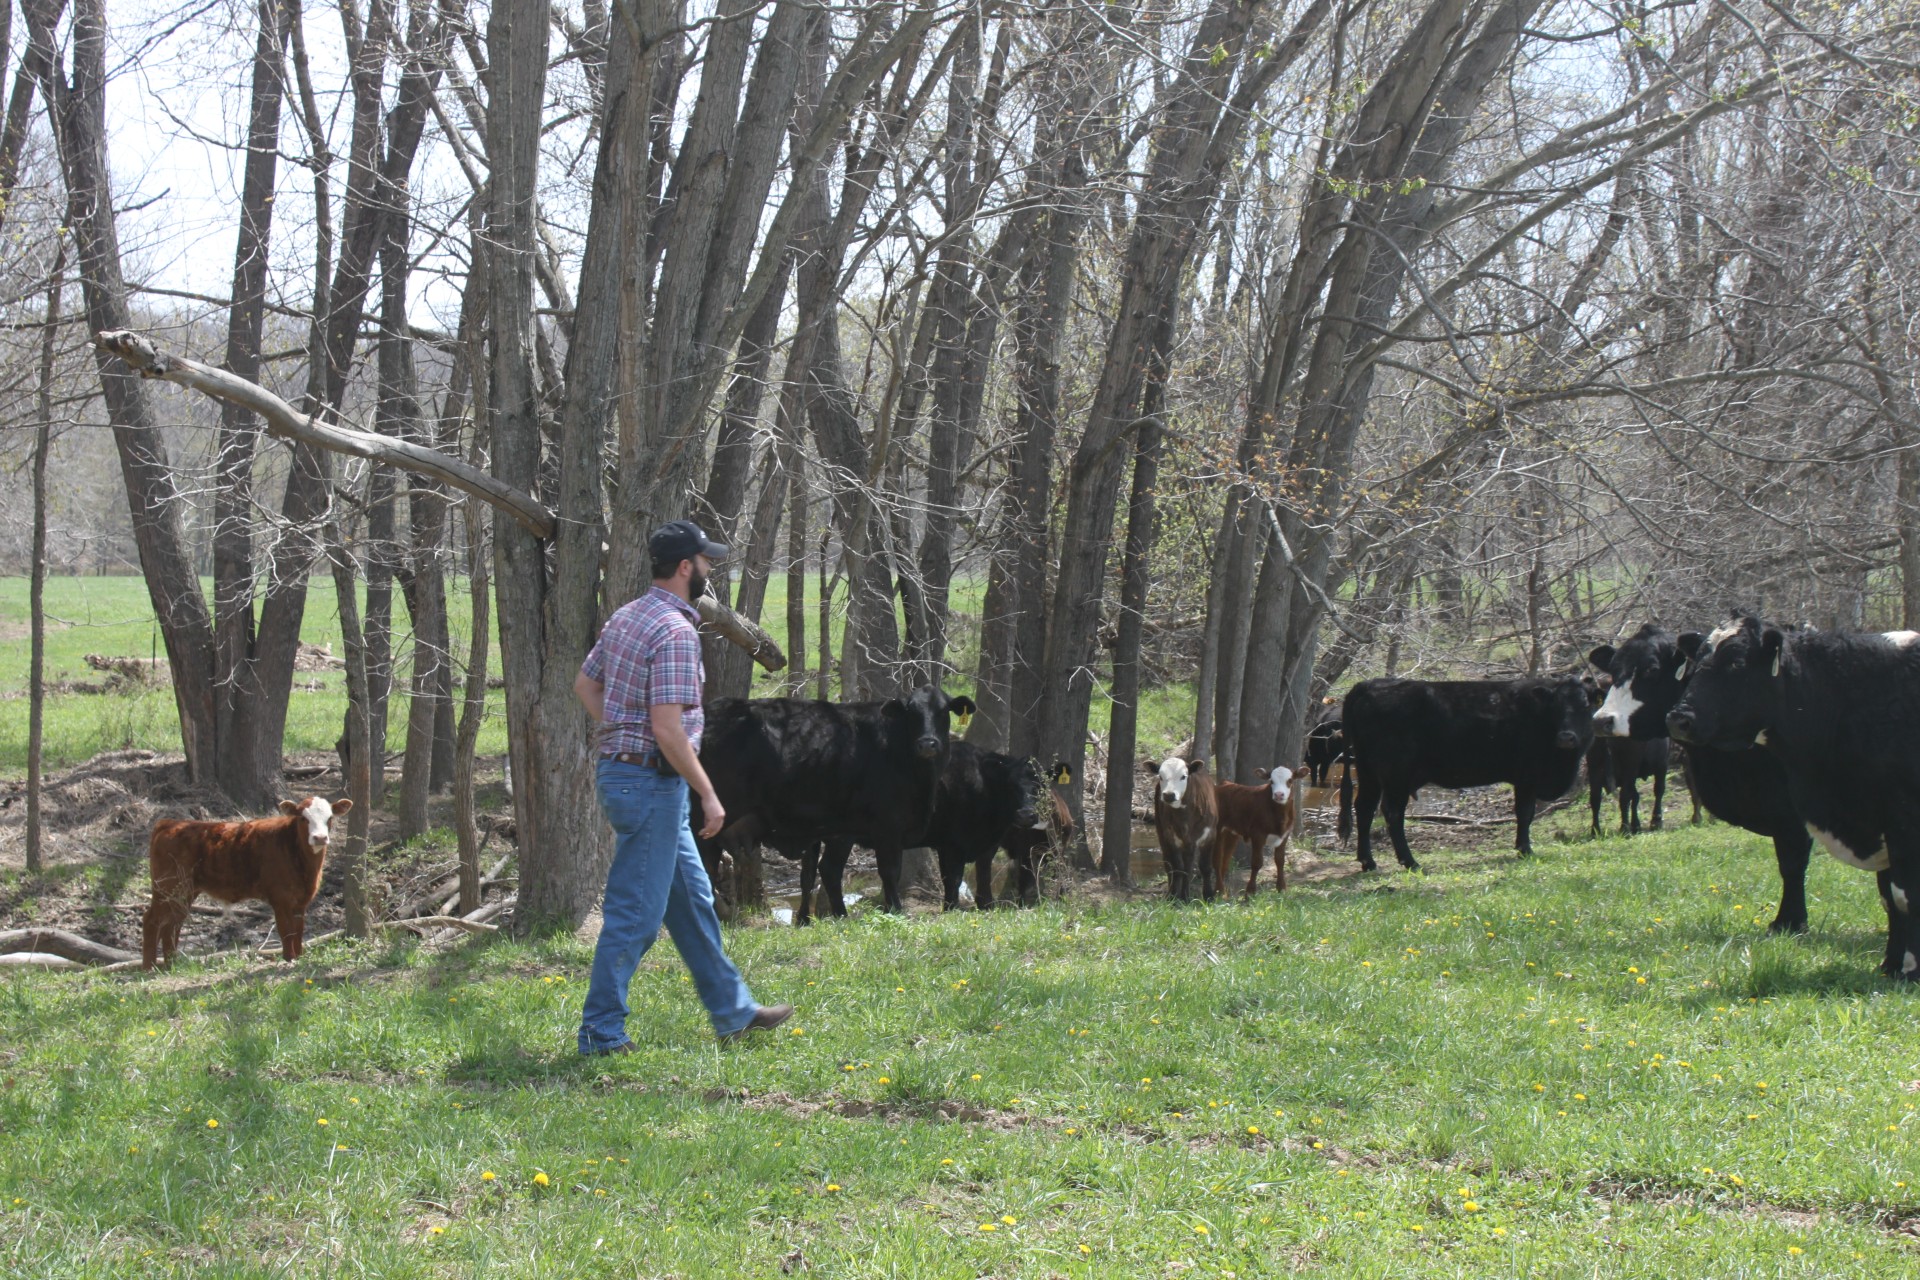 A photo of cattle producer Allan Sharrock Jr. walks his land among the cattle